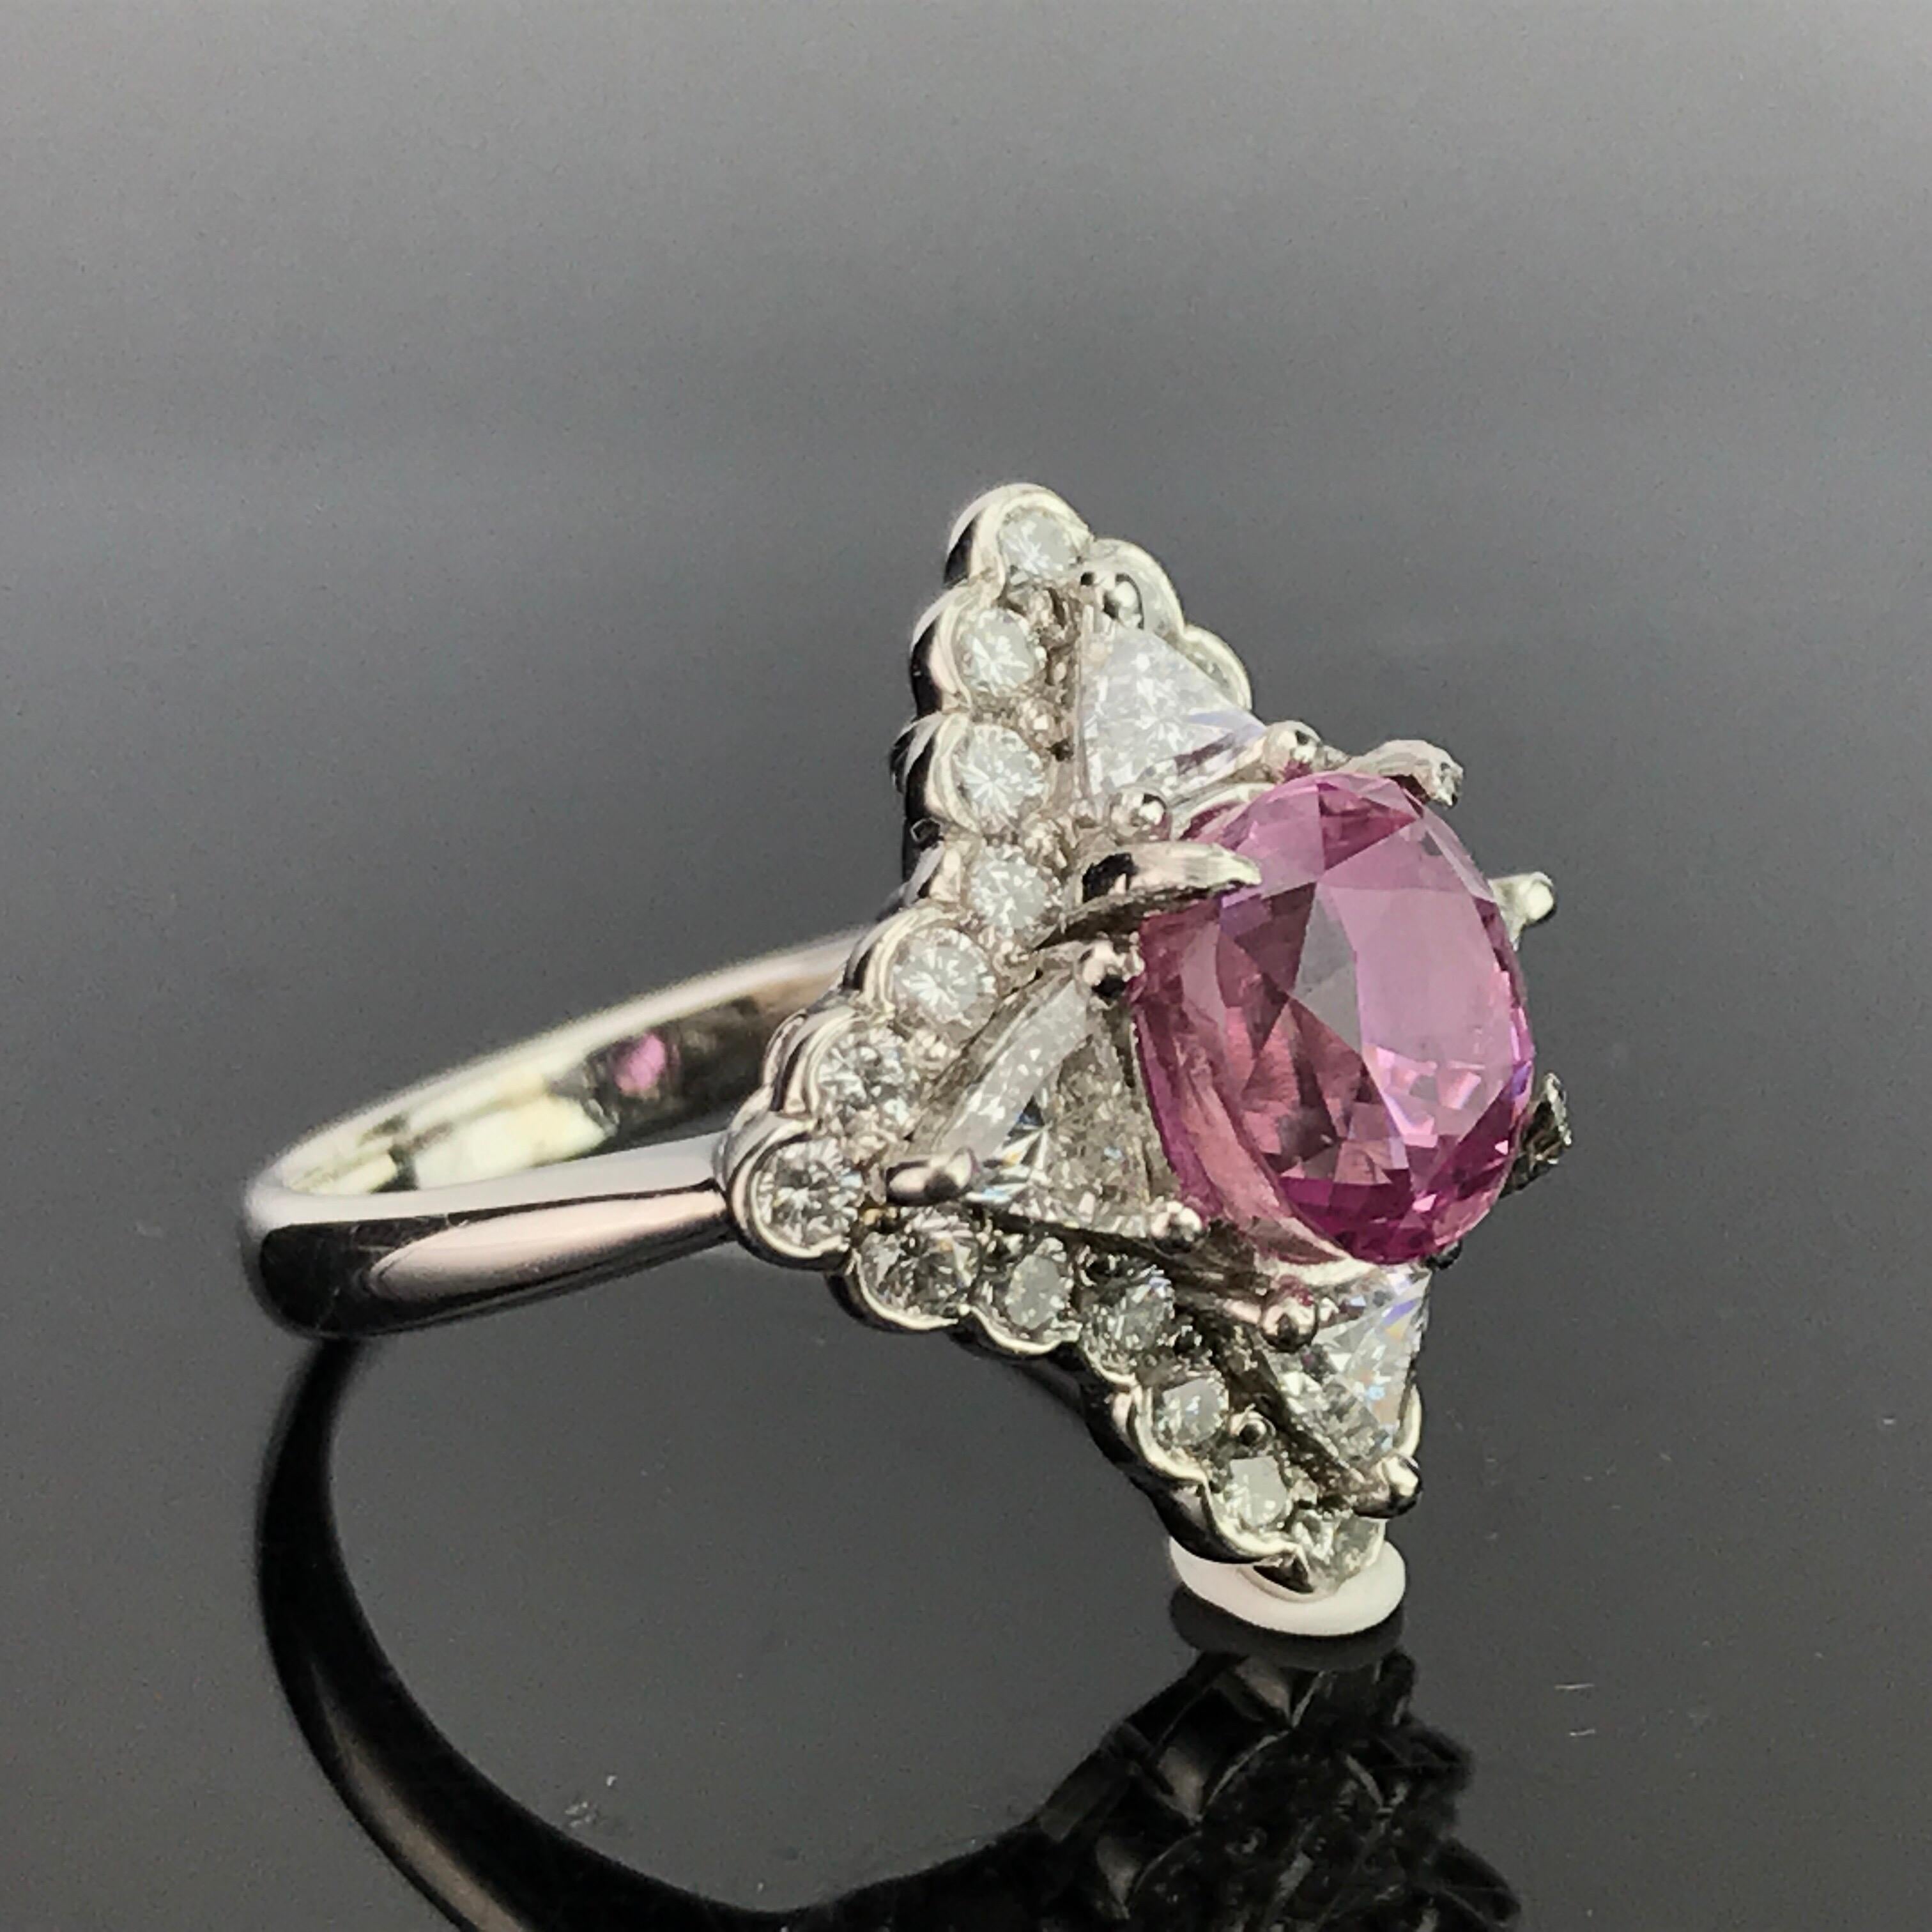 An art-deco looking, statement 3.06 carat oval shaped rare pink Paparadscha cocktail ring, set with white Diamonds in Platinum. Current ring size of US 6 can be changed, without any additional charges.

Stone Details: 
Stone: Pink Paparadscha